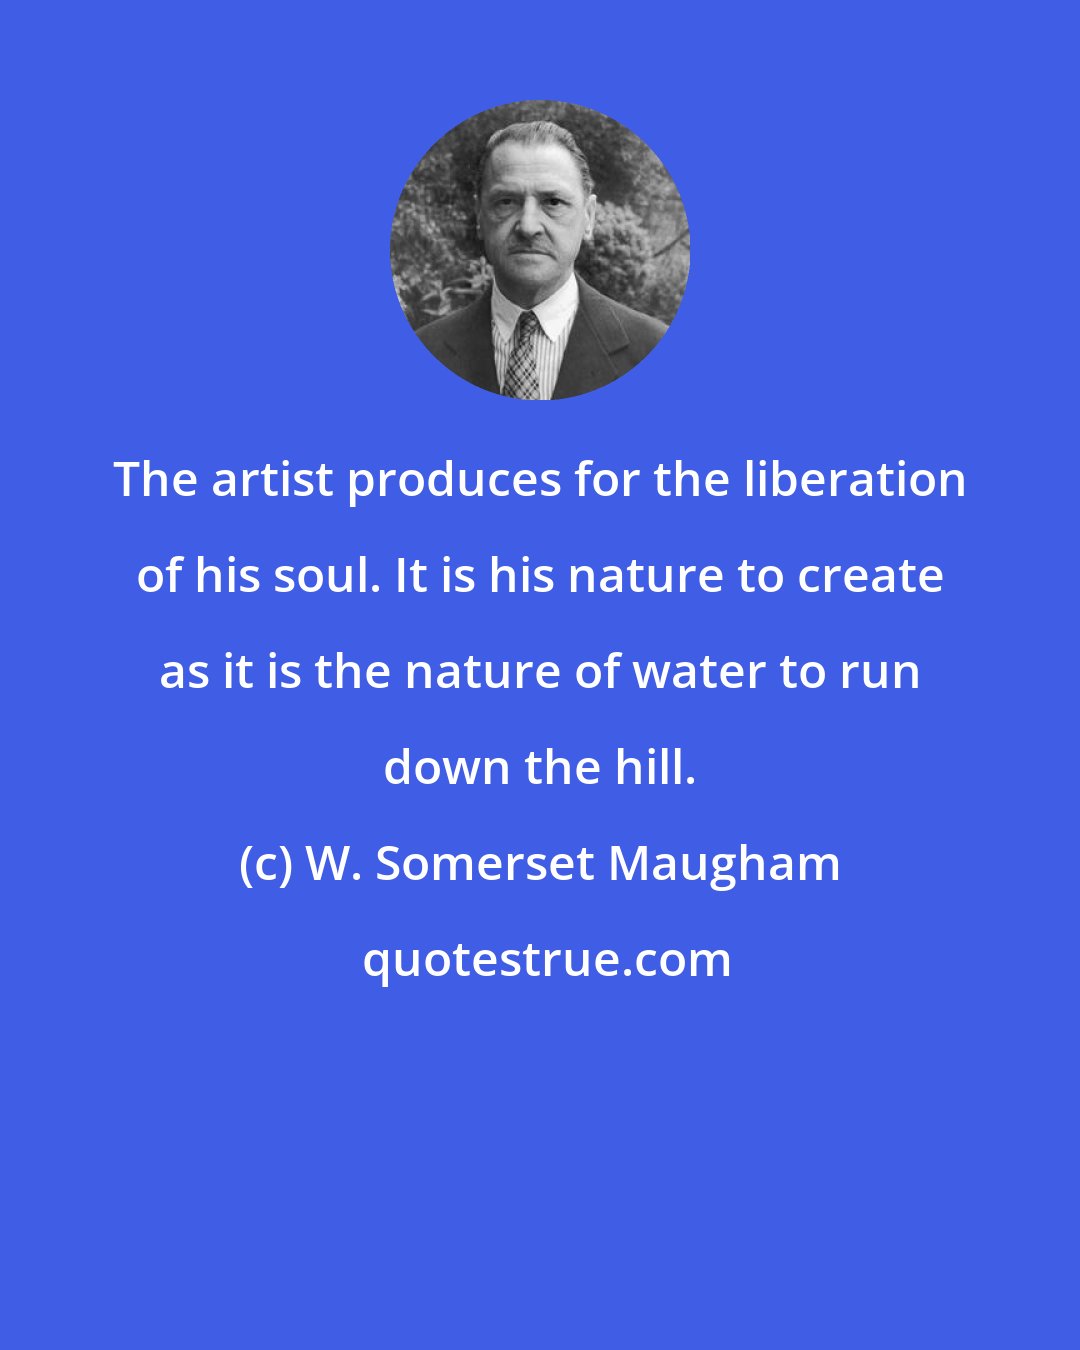 W. Somerset Maugham: The artist produces for the liberation of his soul. It is his nature to create as it is the nature of water to run down the hill.